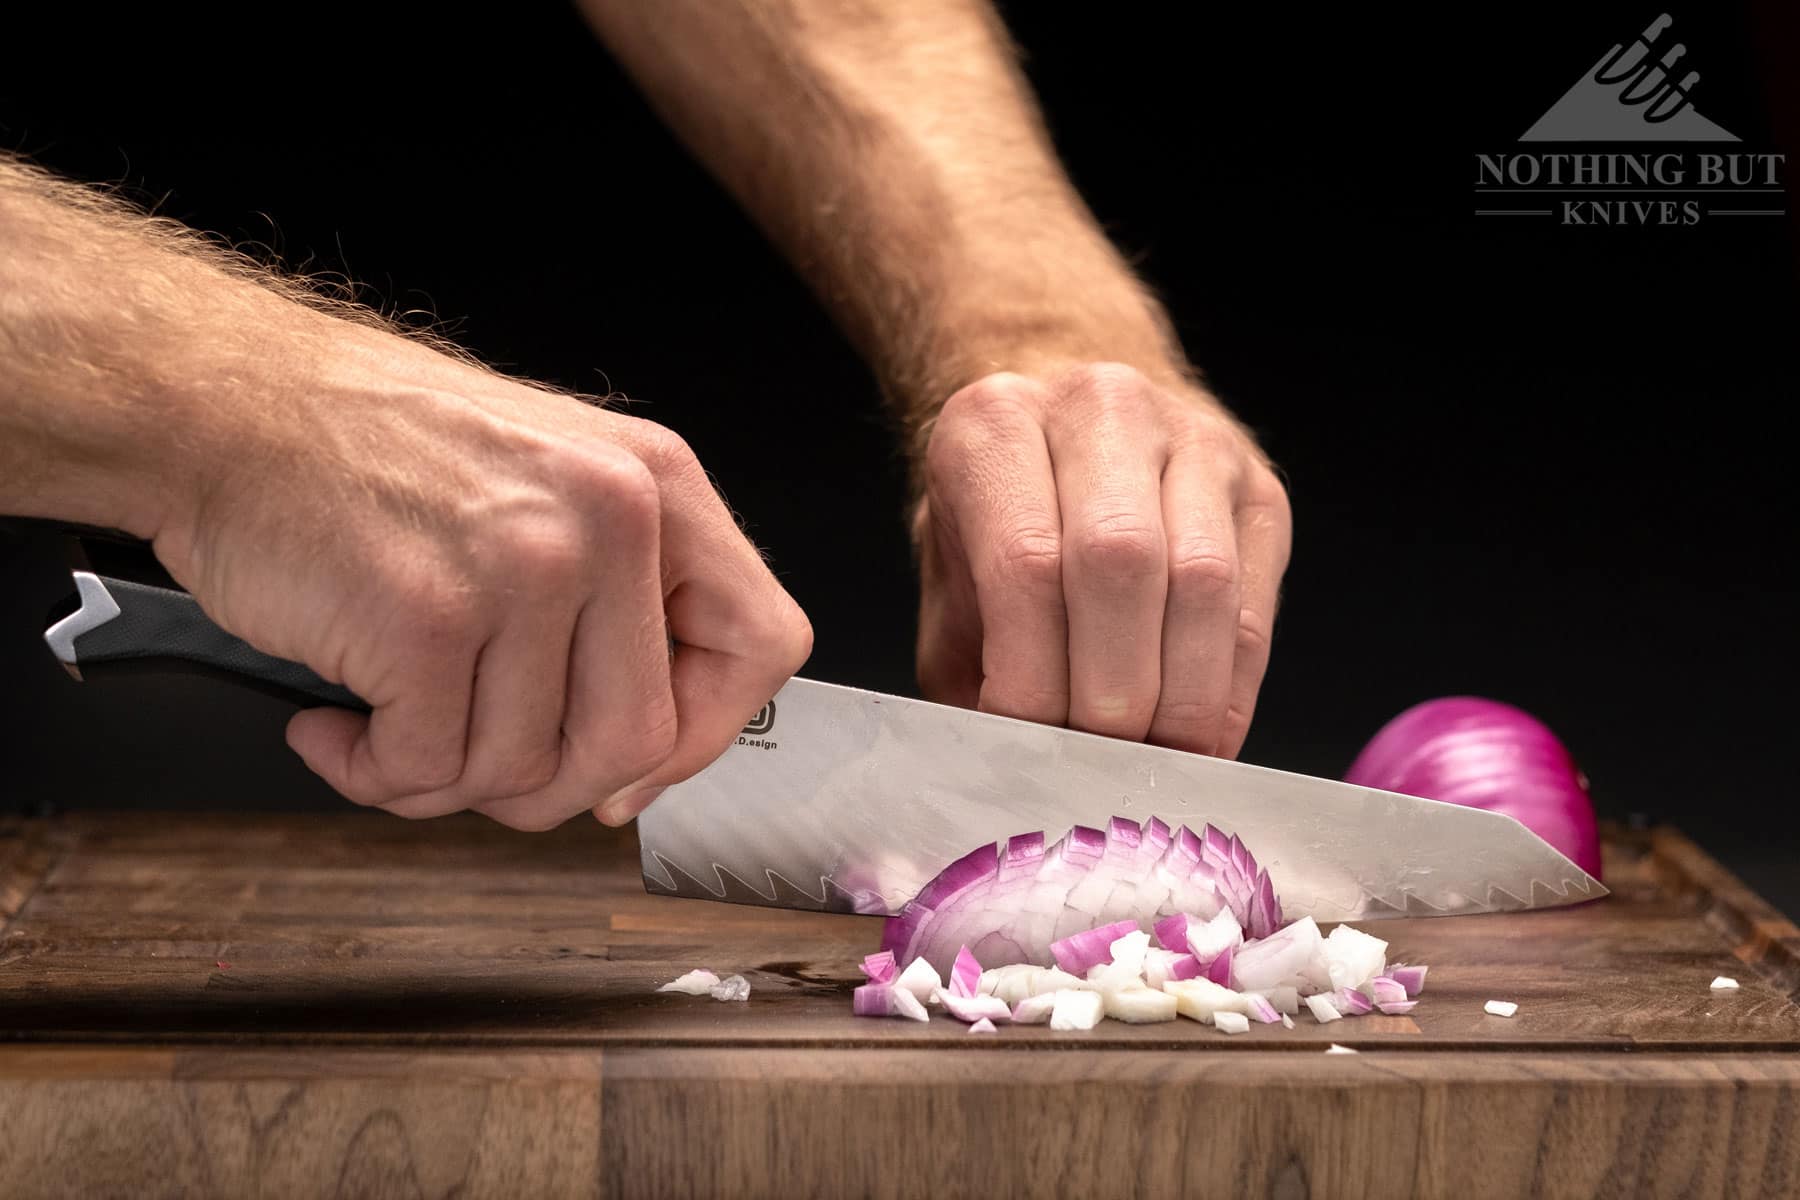 The Morgan did a great job of dicing this red onion. 